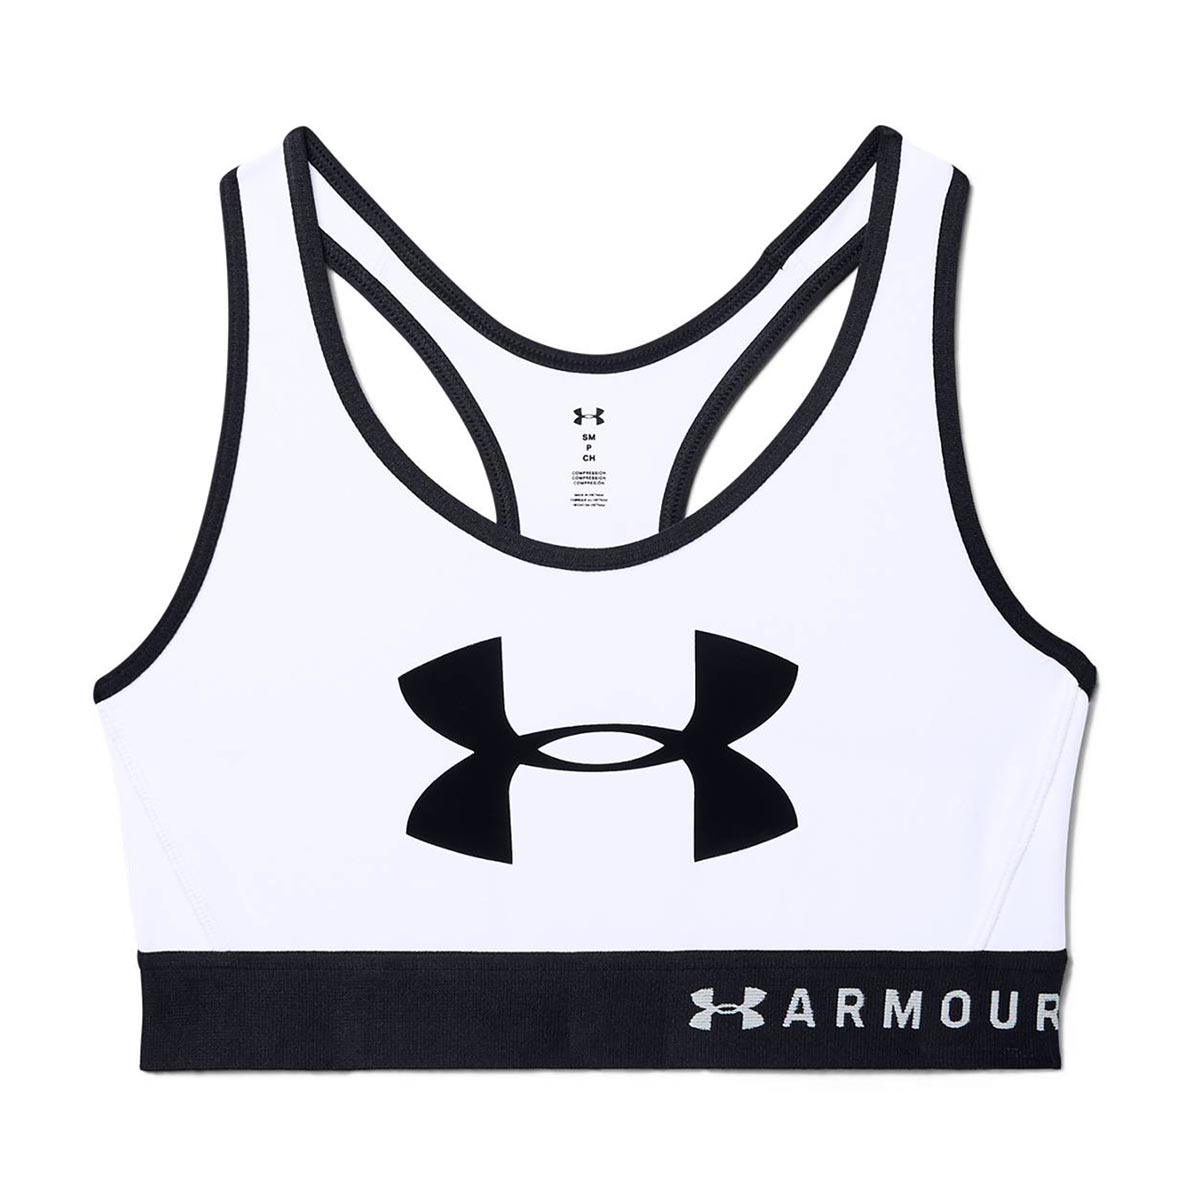 UNDER ARMOUR - ARMOUR MID KEYHOLE GRAPHIC SPORTS BRA